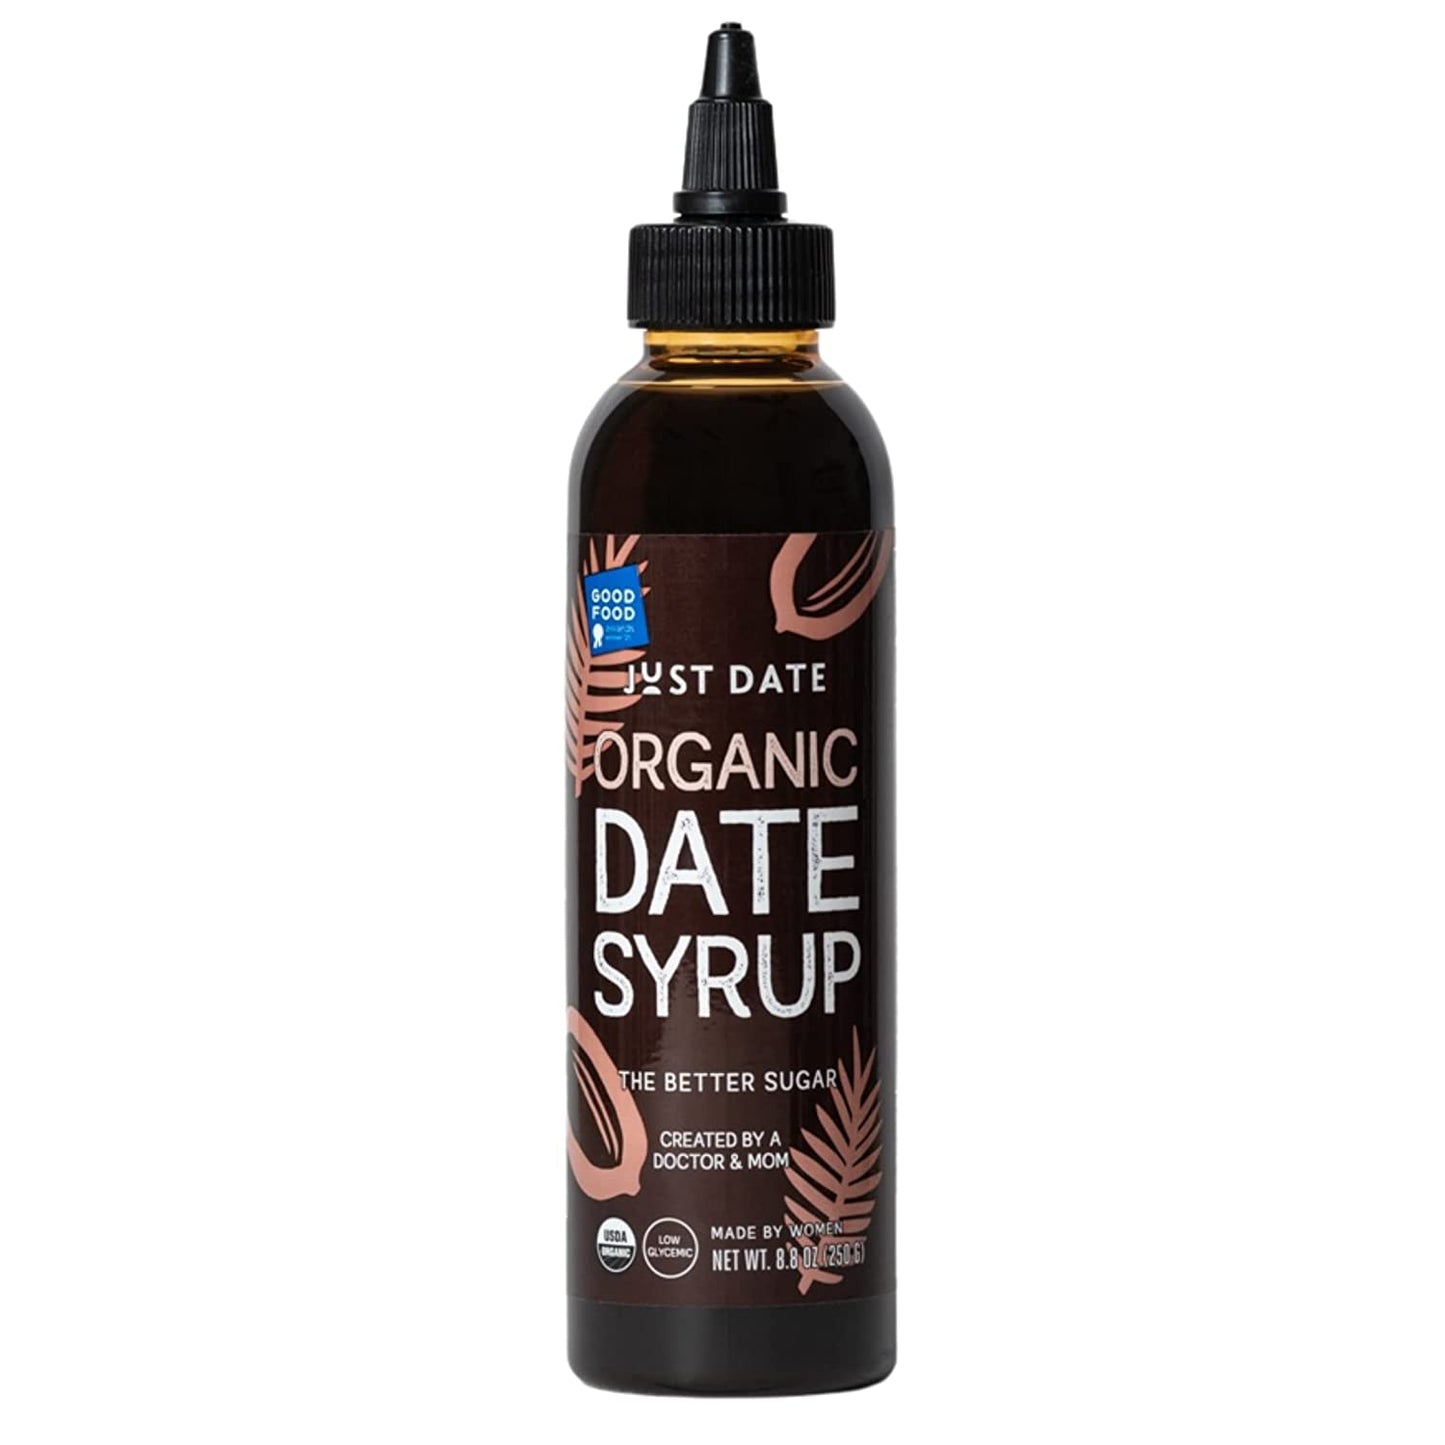 JUST DATE ORGANIC DATE SYRUP